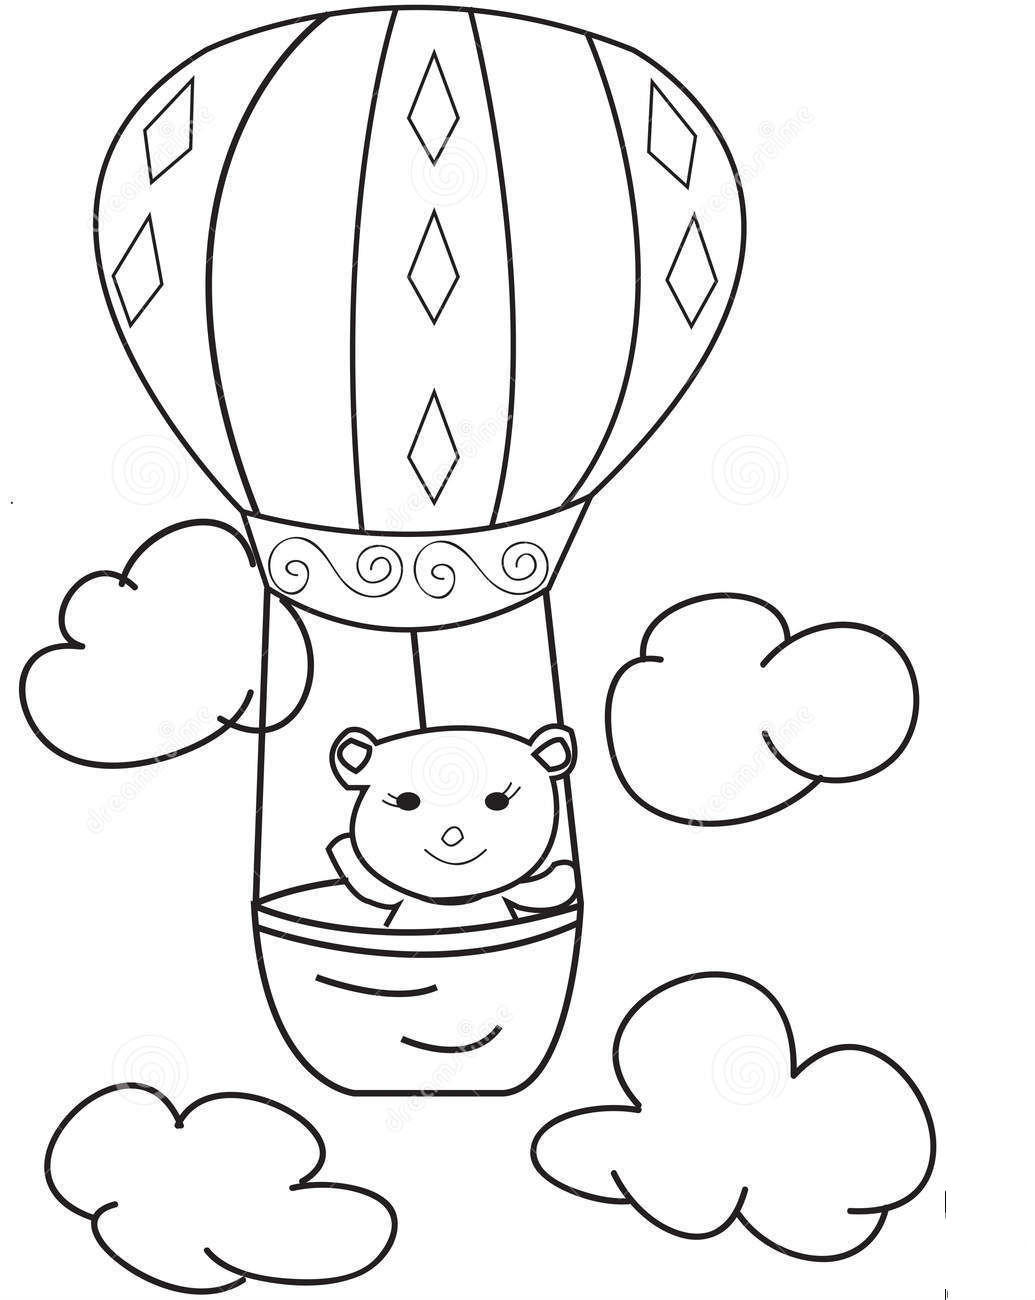 Coloring Transportation For Toddlers: Hot Air Balloons Coloring Pages